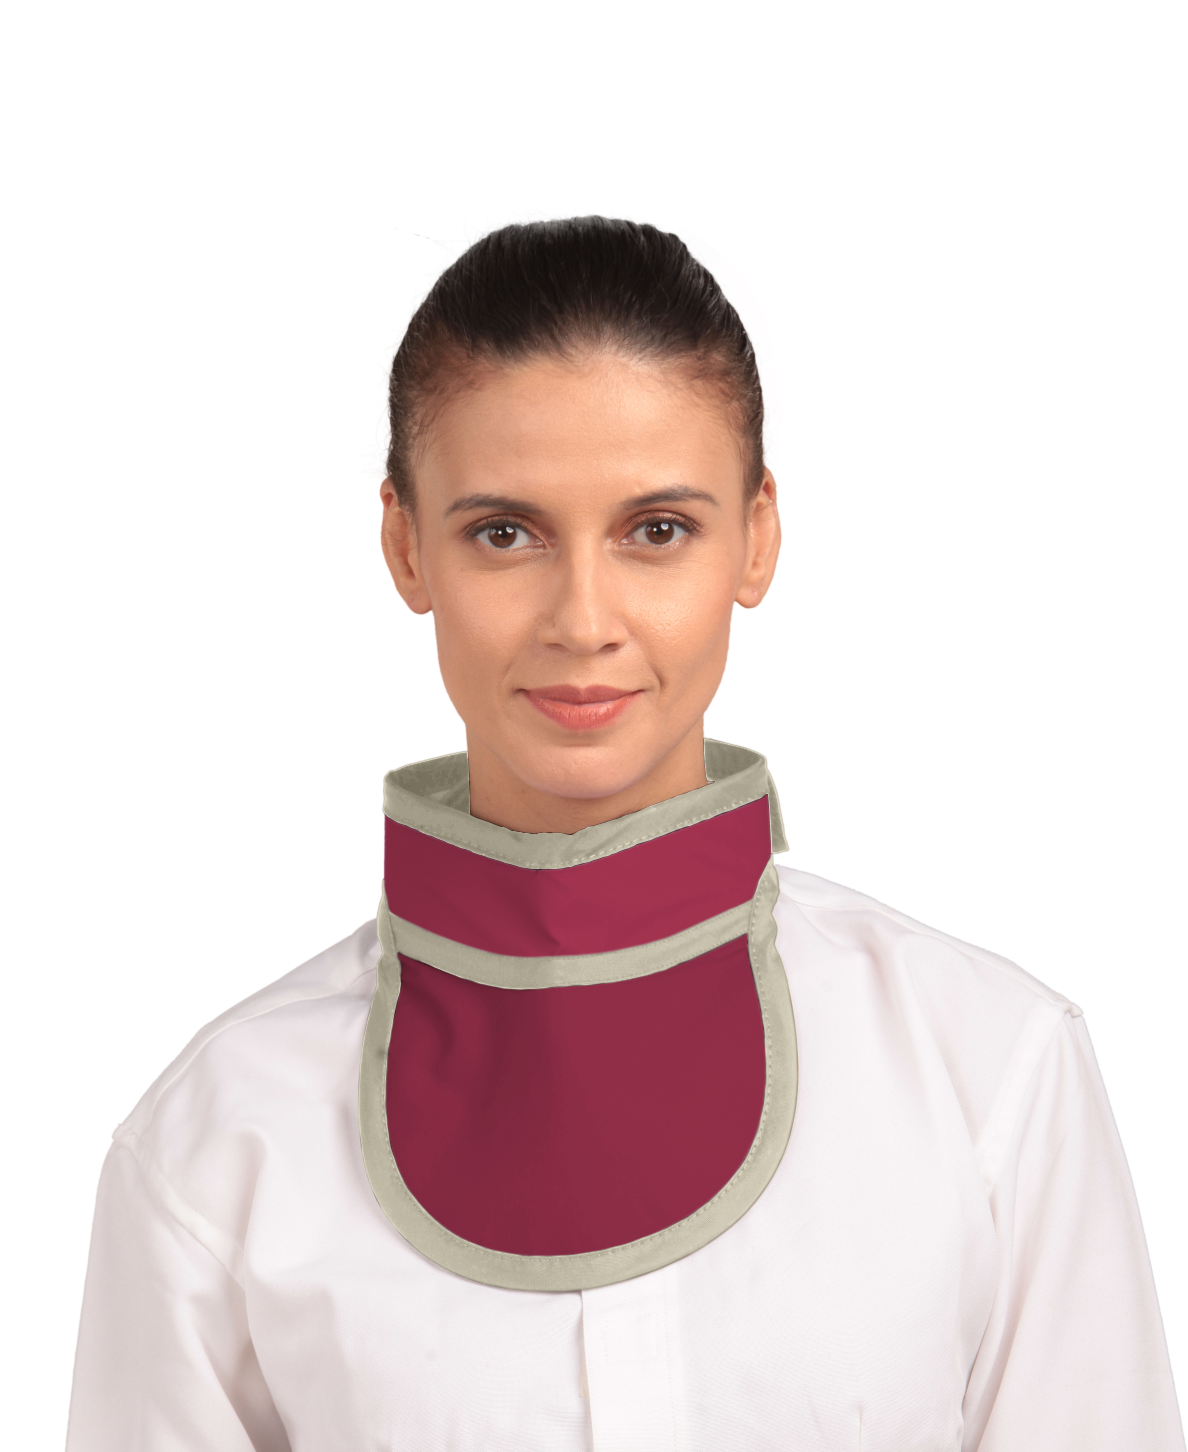 Frontal view of a female model wearing a Bordeaux red thyroid collar “Slim” lined with beige color around the outer edges.